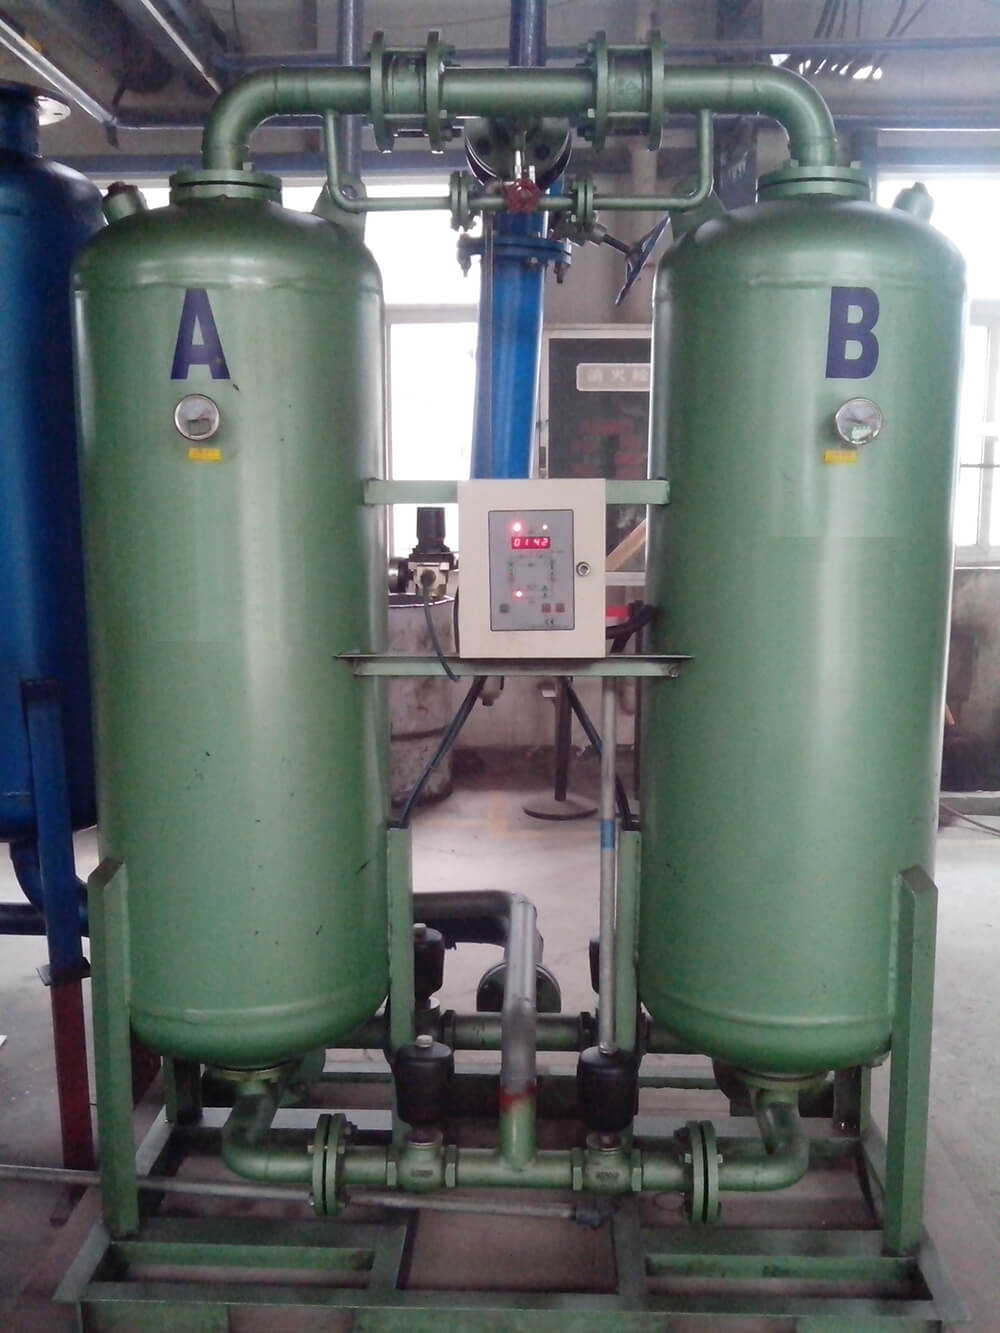 Field CBW compressed air heatless adsorption dryer in use